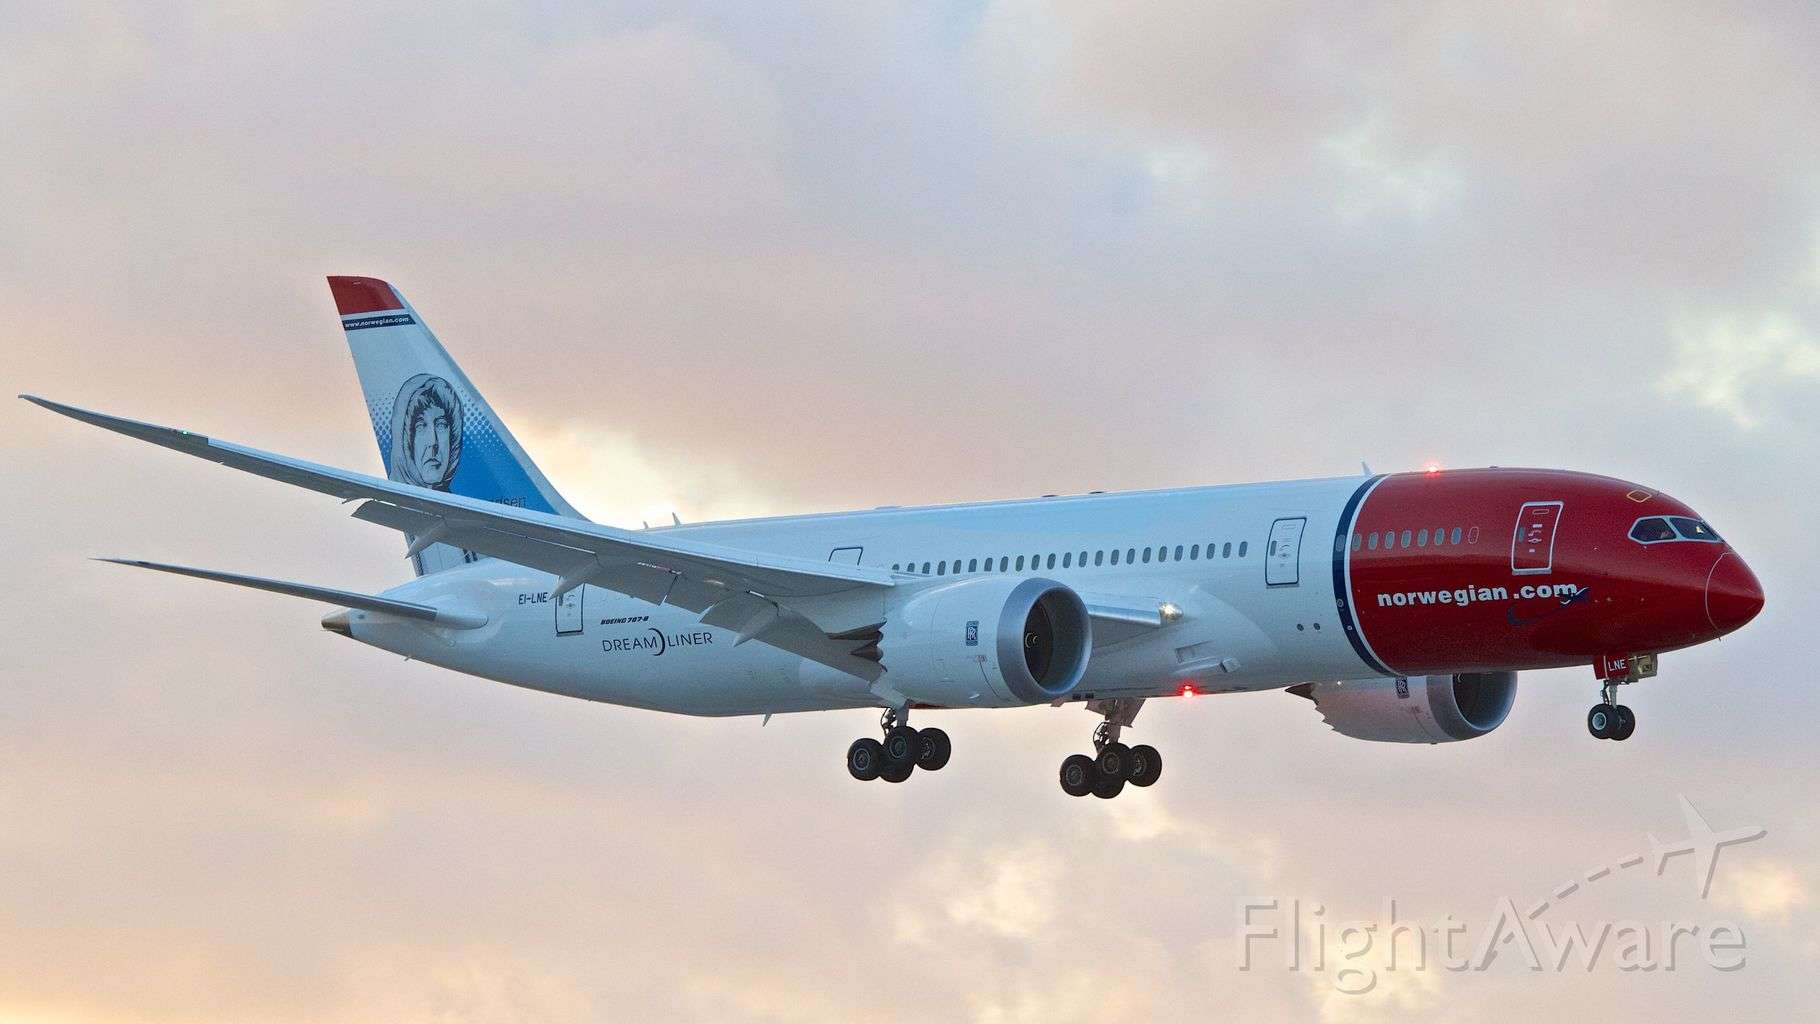 Edinburgh to get direct flights to the US thanks to Norwegian Long Haul